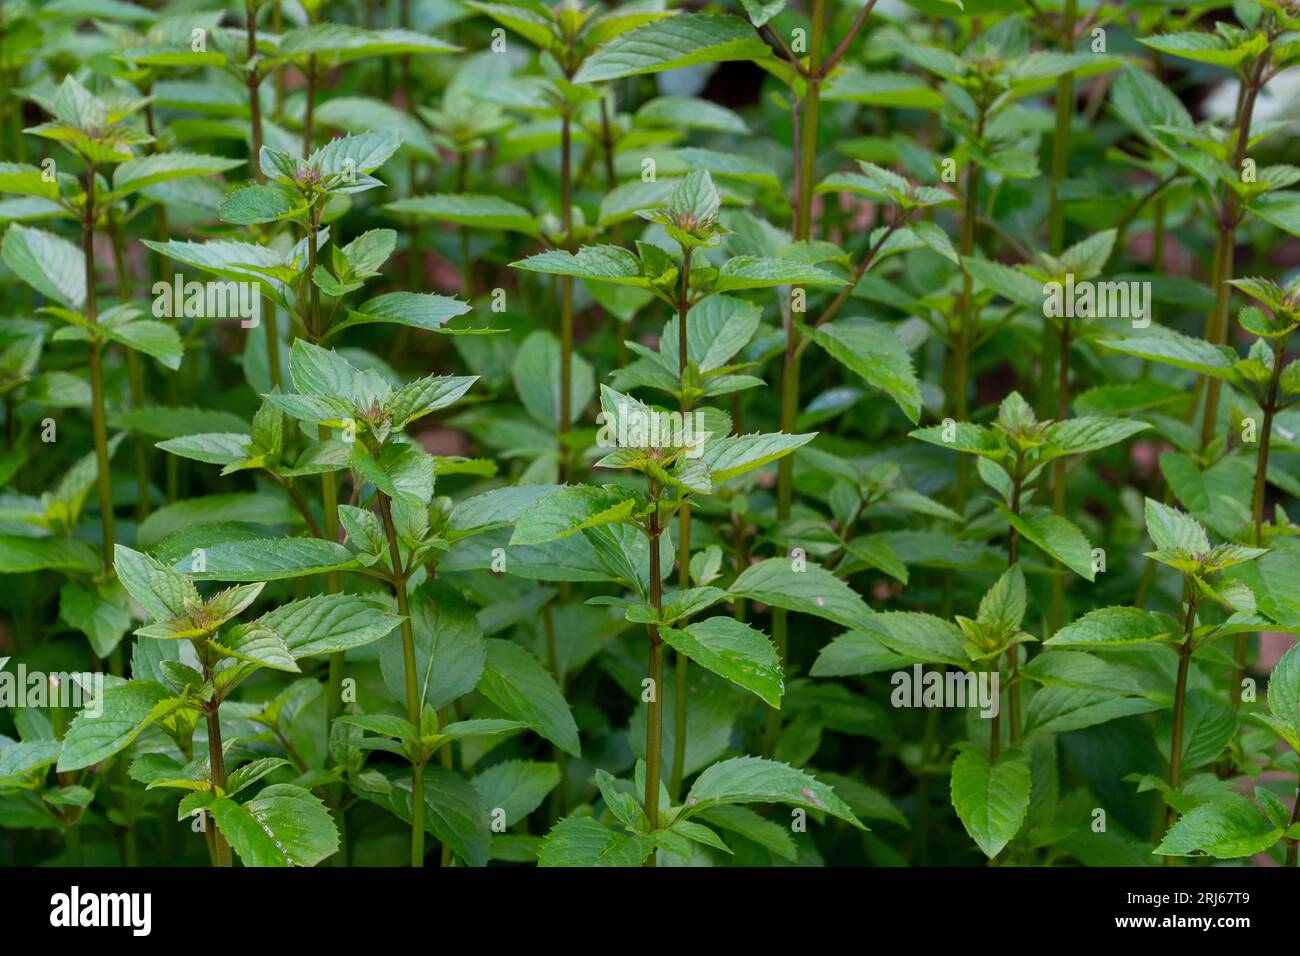 Spearmint plant example, also known as garden mint, common mint, lamb mint, and mackerel mint, is a species of mint, Mentha spicata, native to Europe. Stock Photo